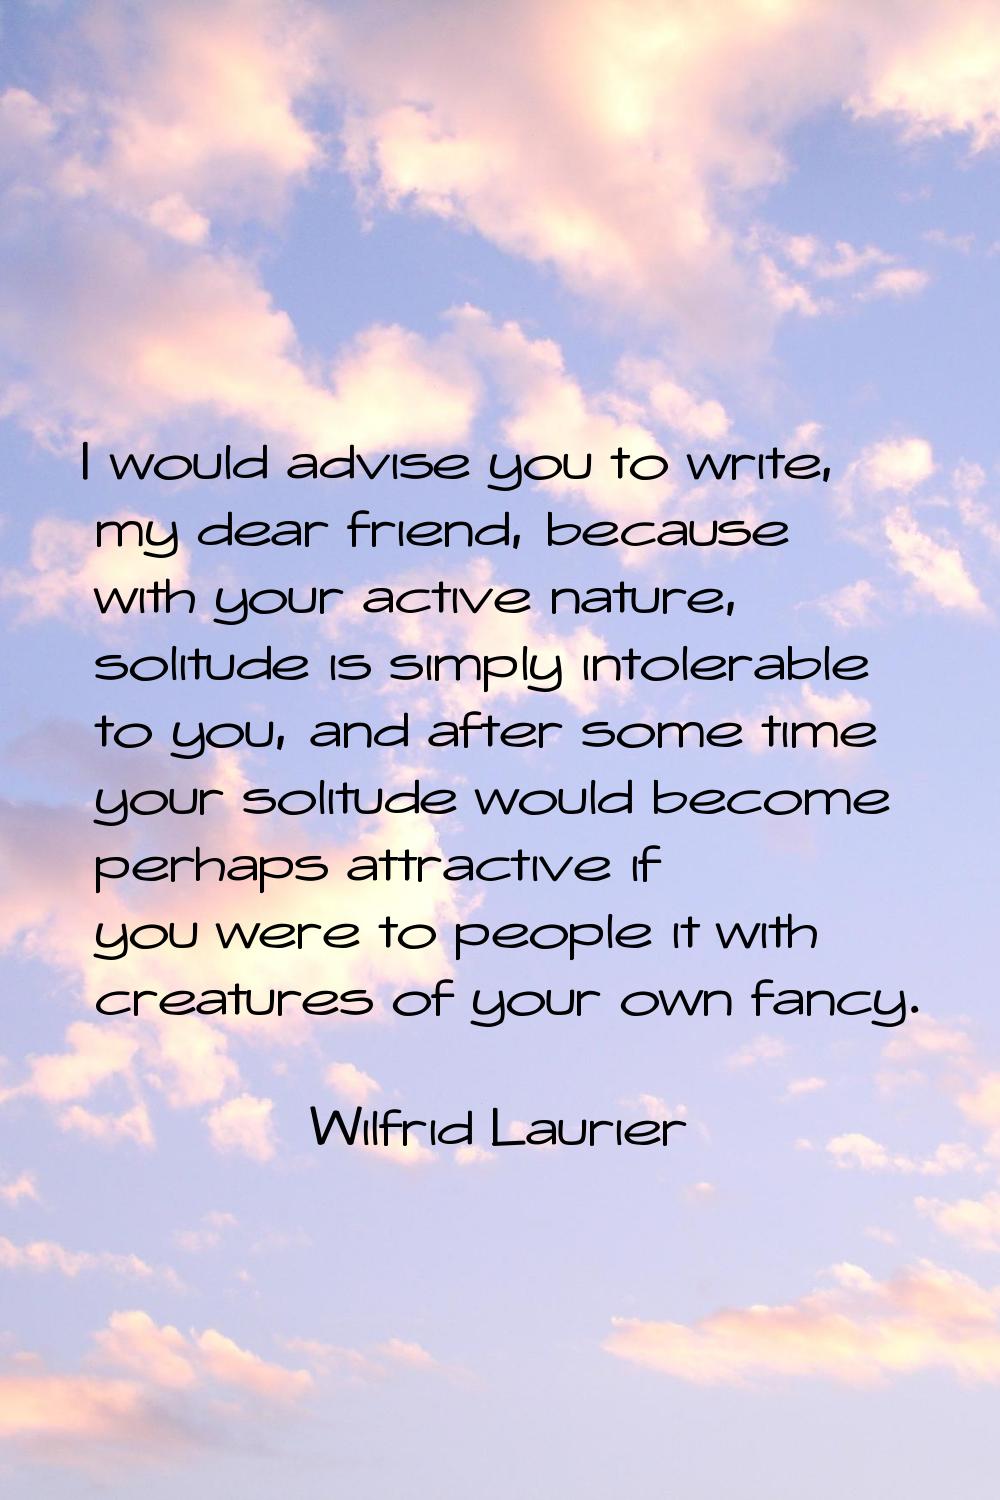 I would advise you to write, my dear friend, because with your active nature, solitude is simply in